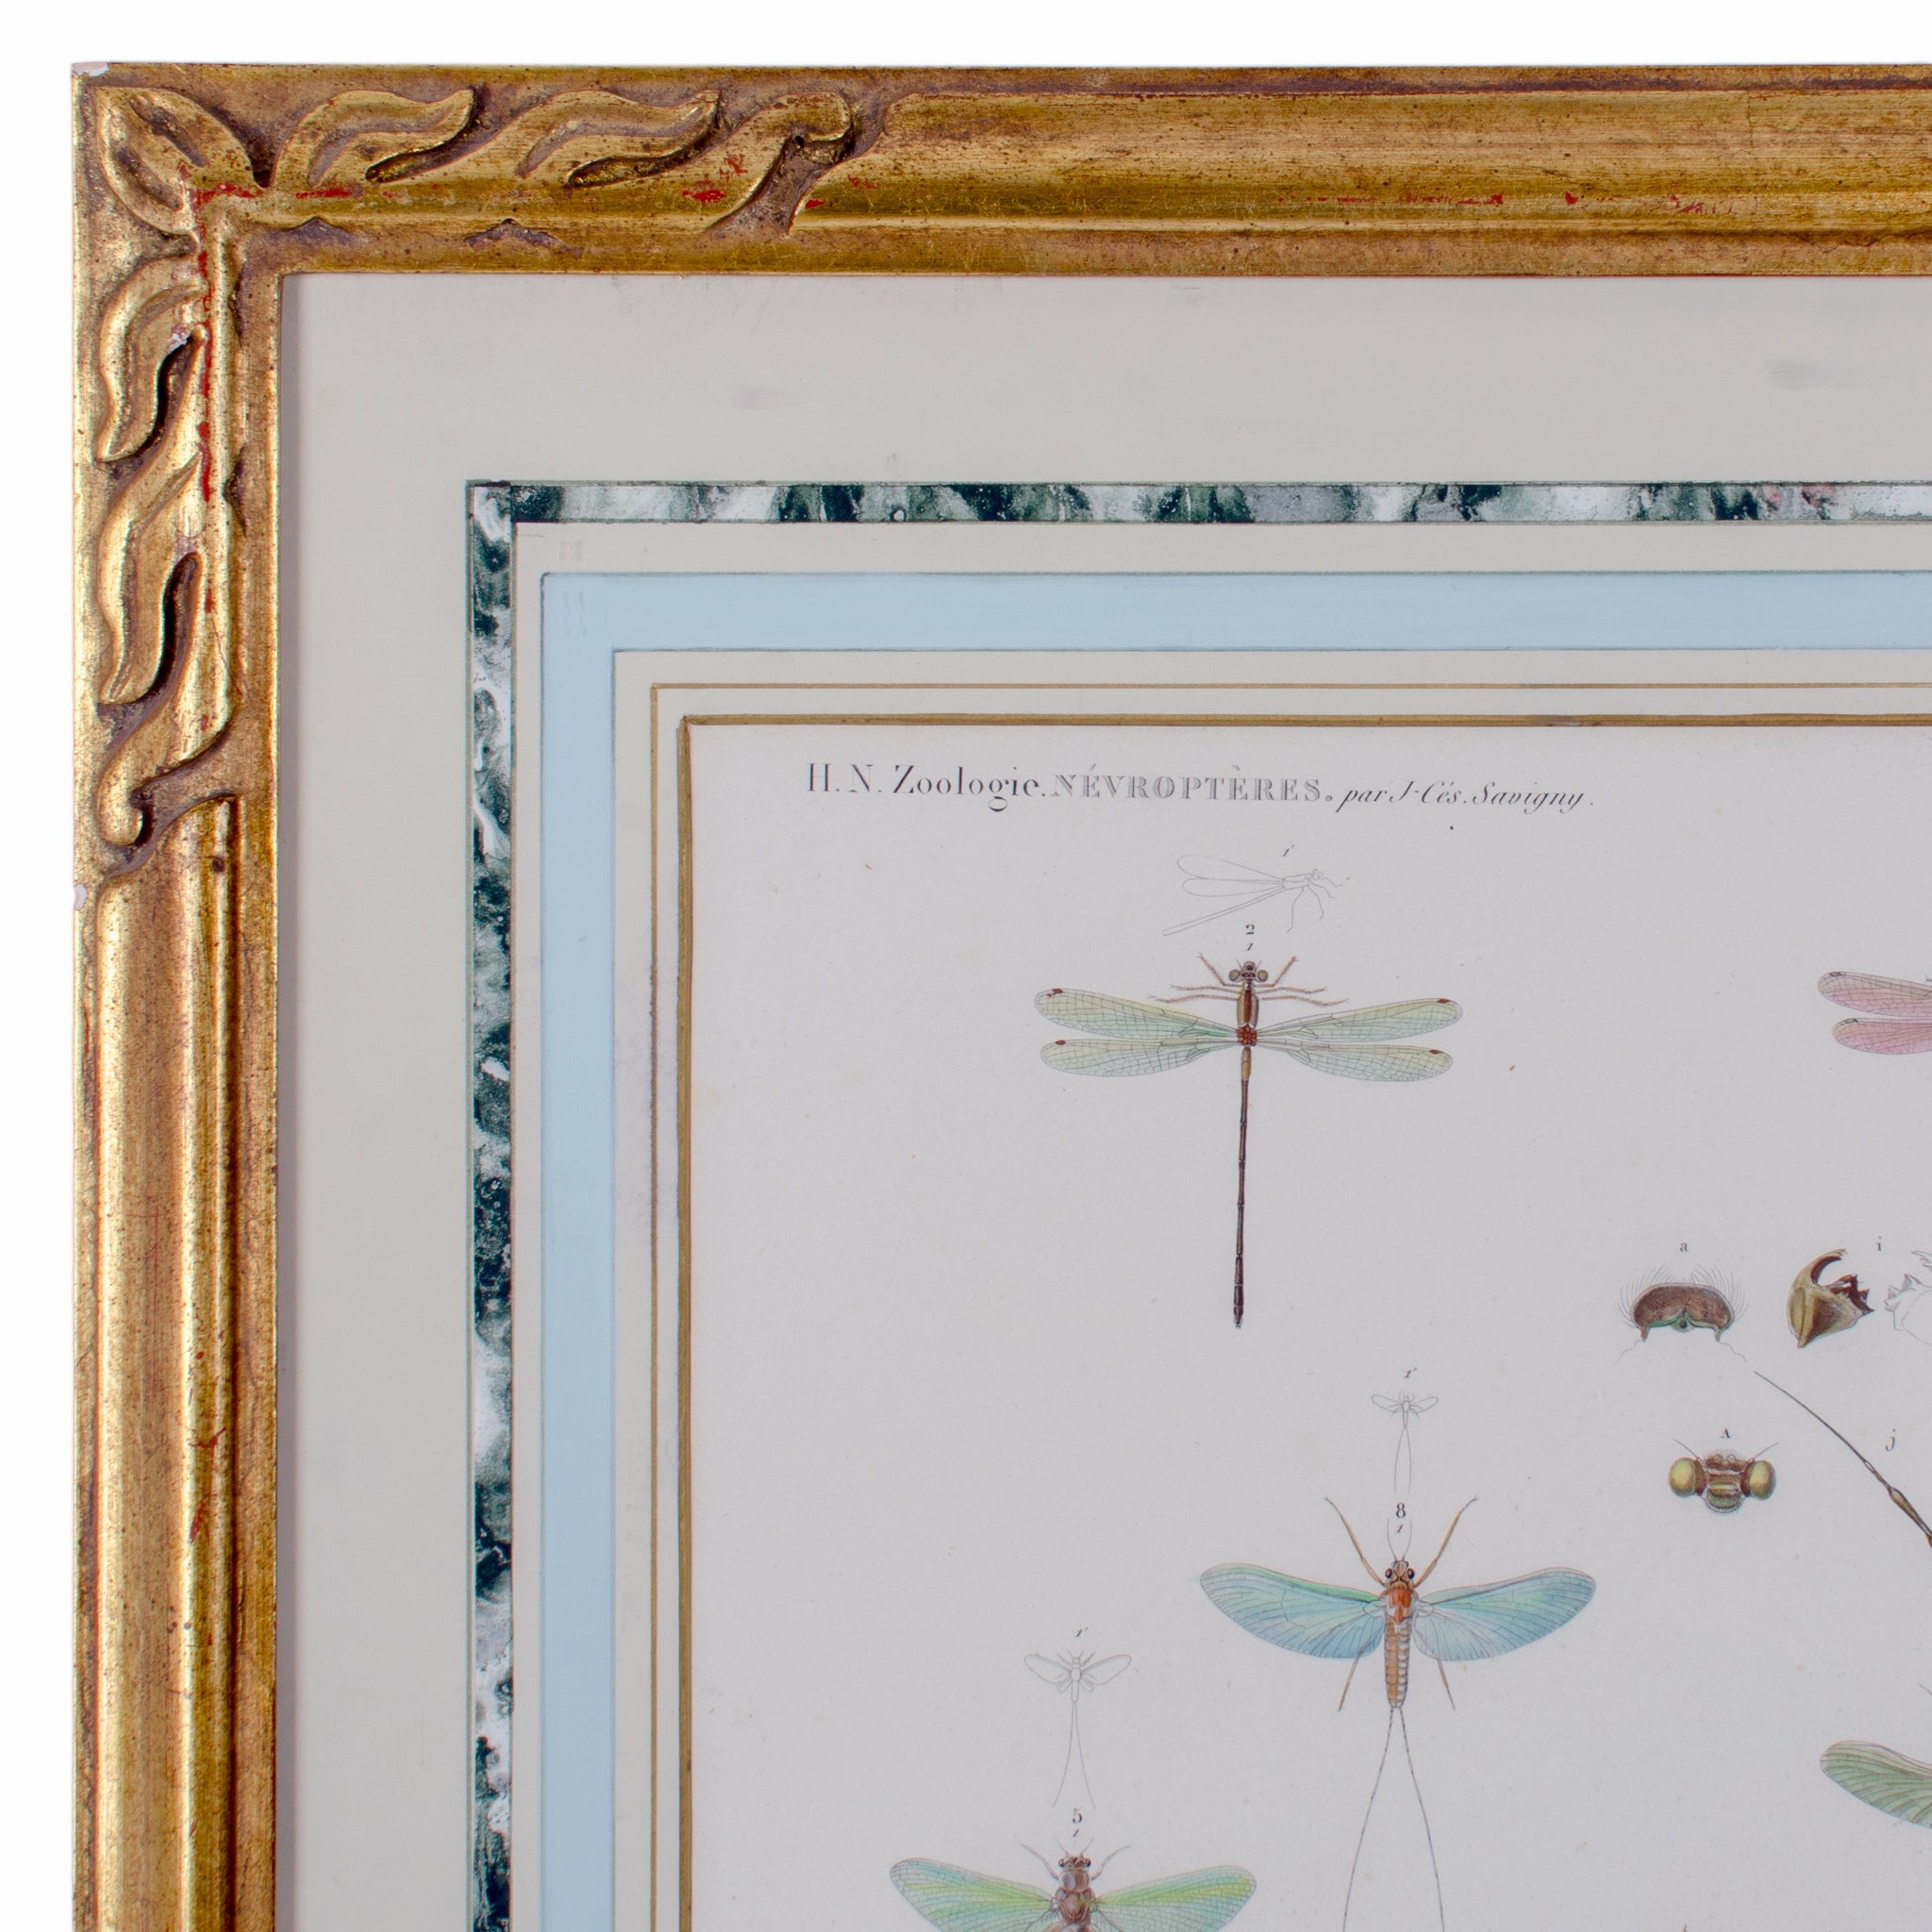 Large Engraving of Winged-Insects by J-Ces Savigny c.1812